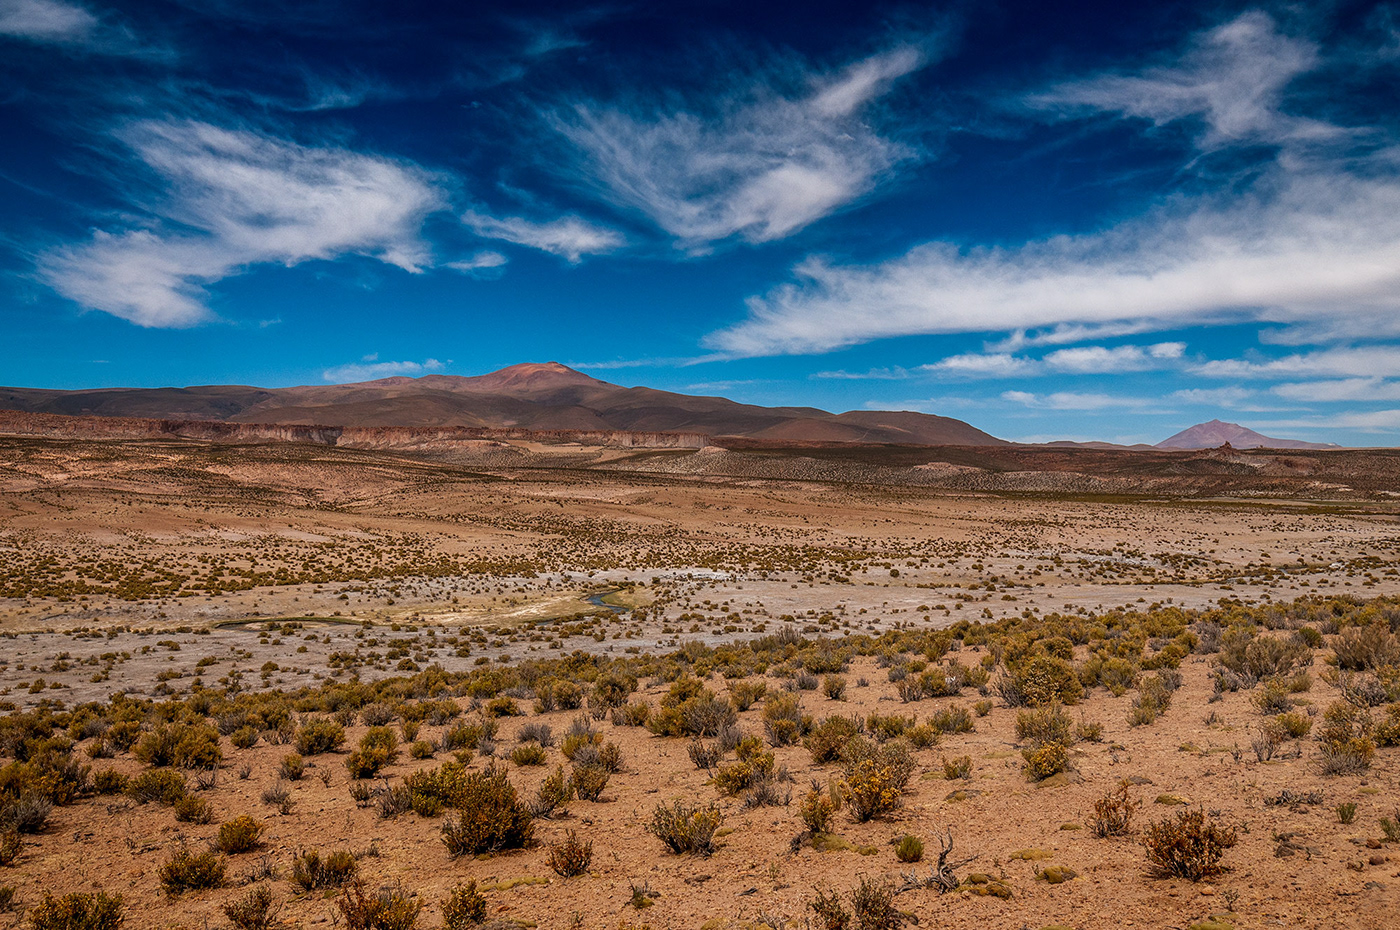 Landscape photography of the desertic bolivian altiplano.